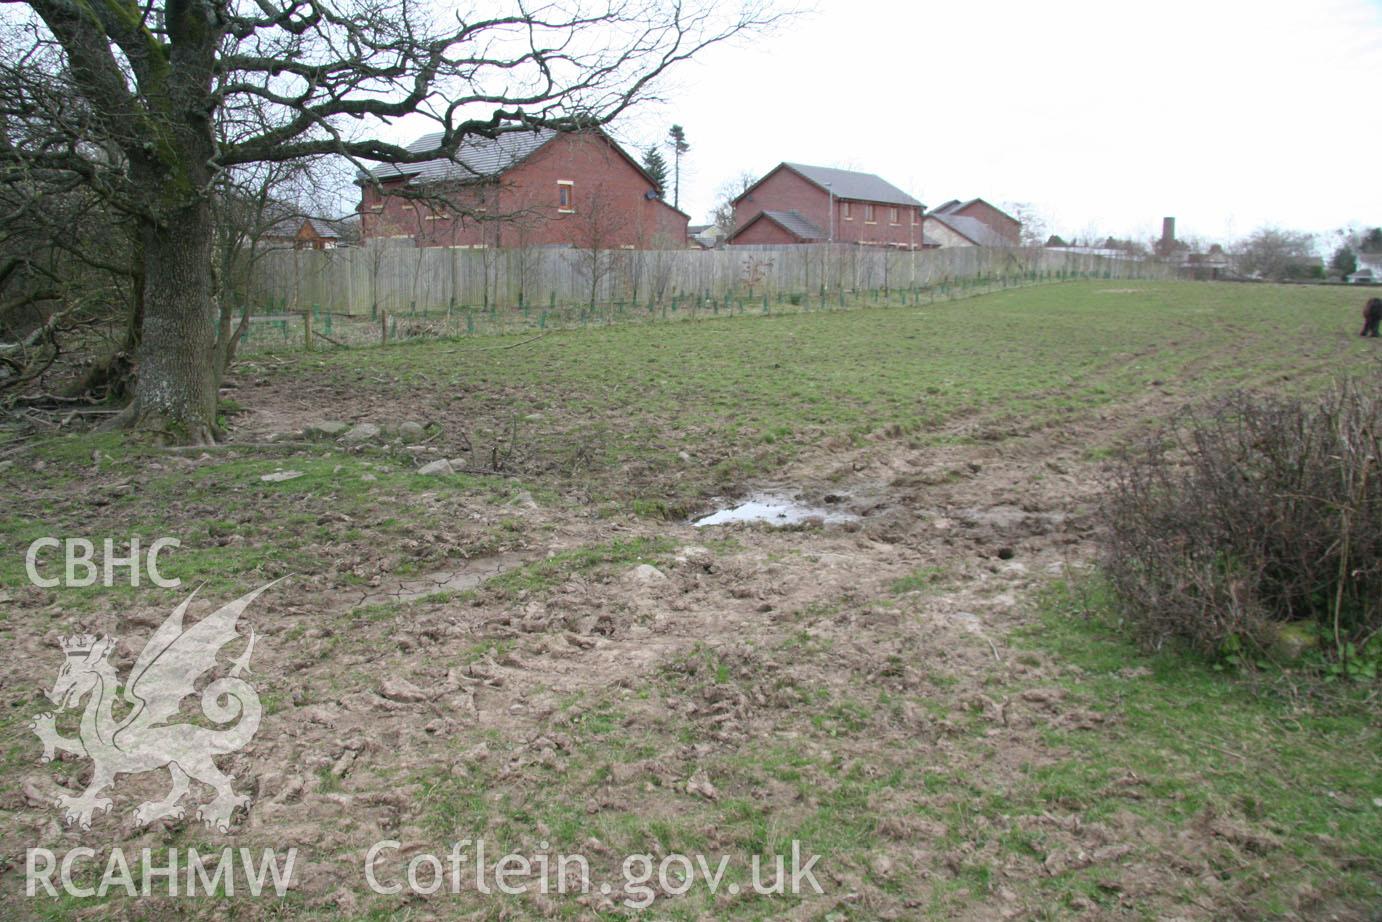 'Break in field's eastern boundary (looking north-west).' Digital colour photograph taken during site visit to land south of school lane, Penperlleni. Part of Archaeological Desk Based Assessment conducted by Iestyn Jones of Archaeology Wales, 2014.